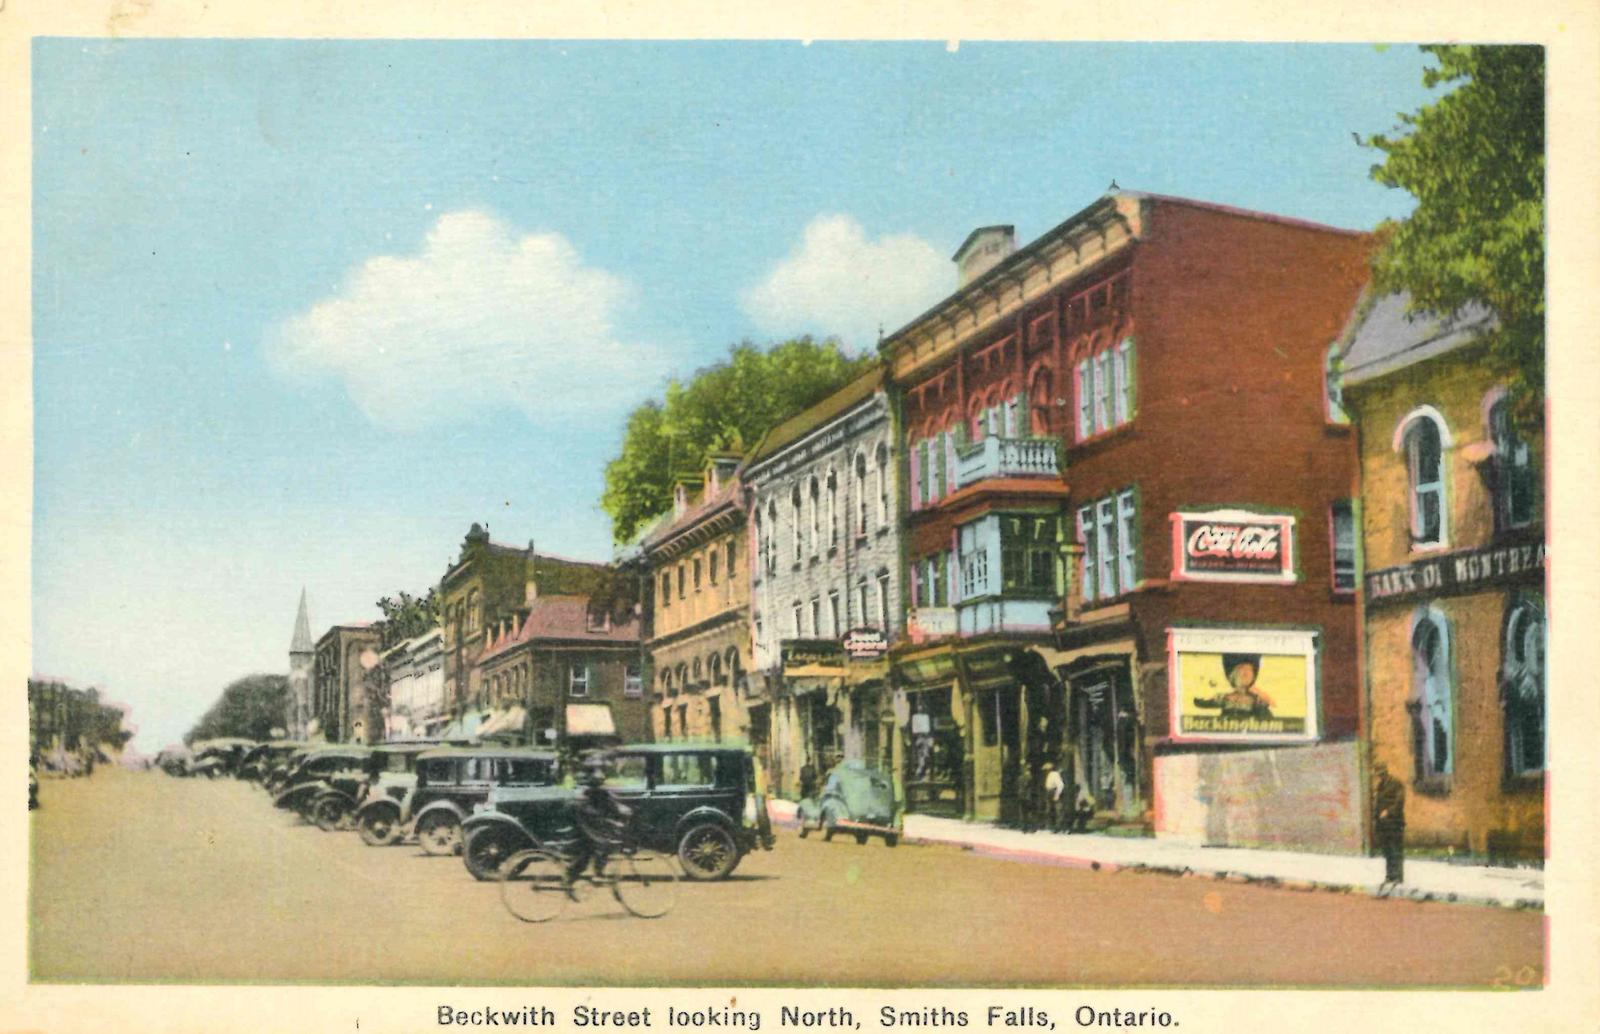 Beckwith Street looking North, Smiths Falls postcard, ca. 1930